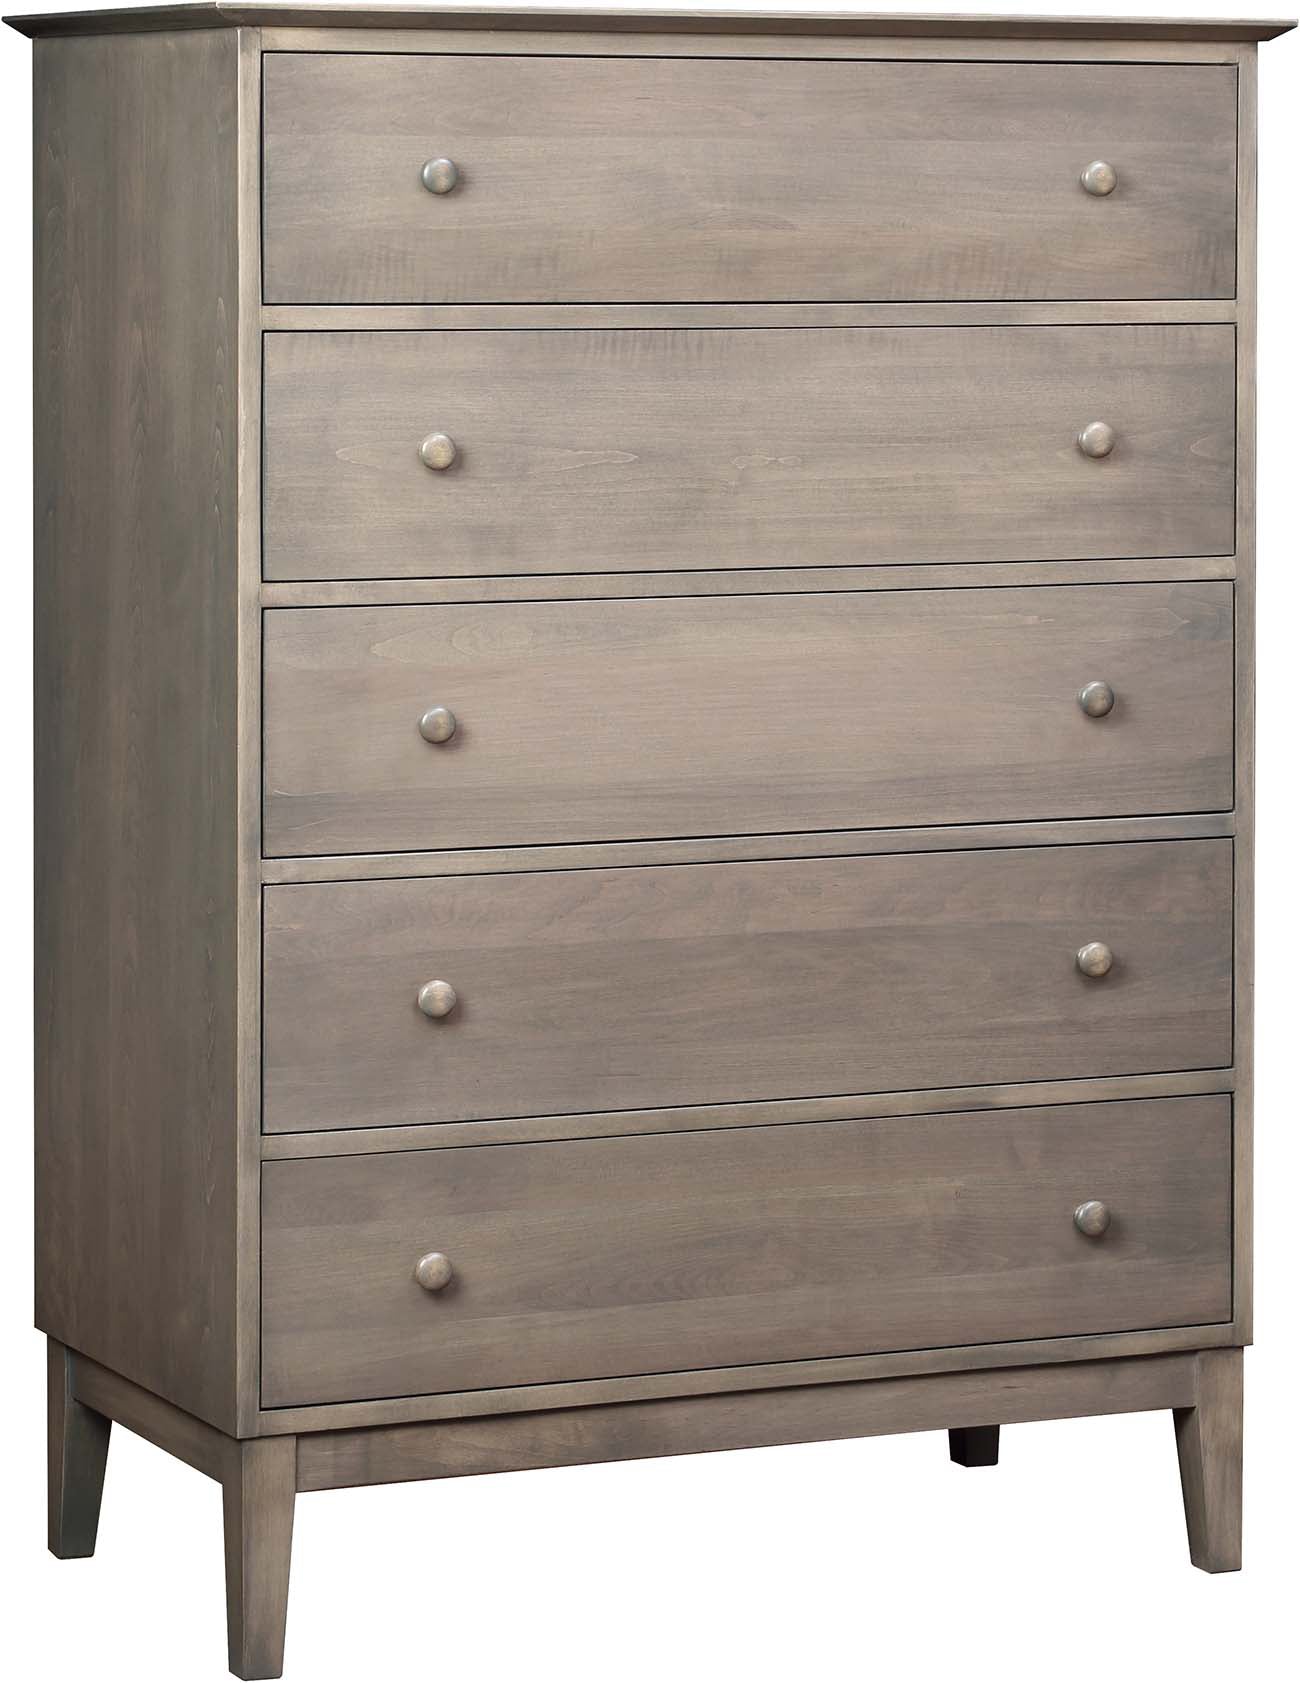 Gable Road Tall Chest - Stickley Brand